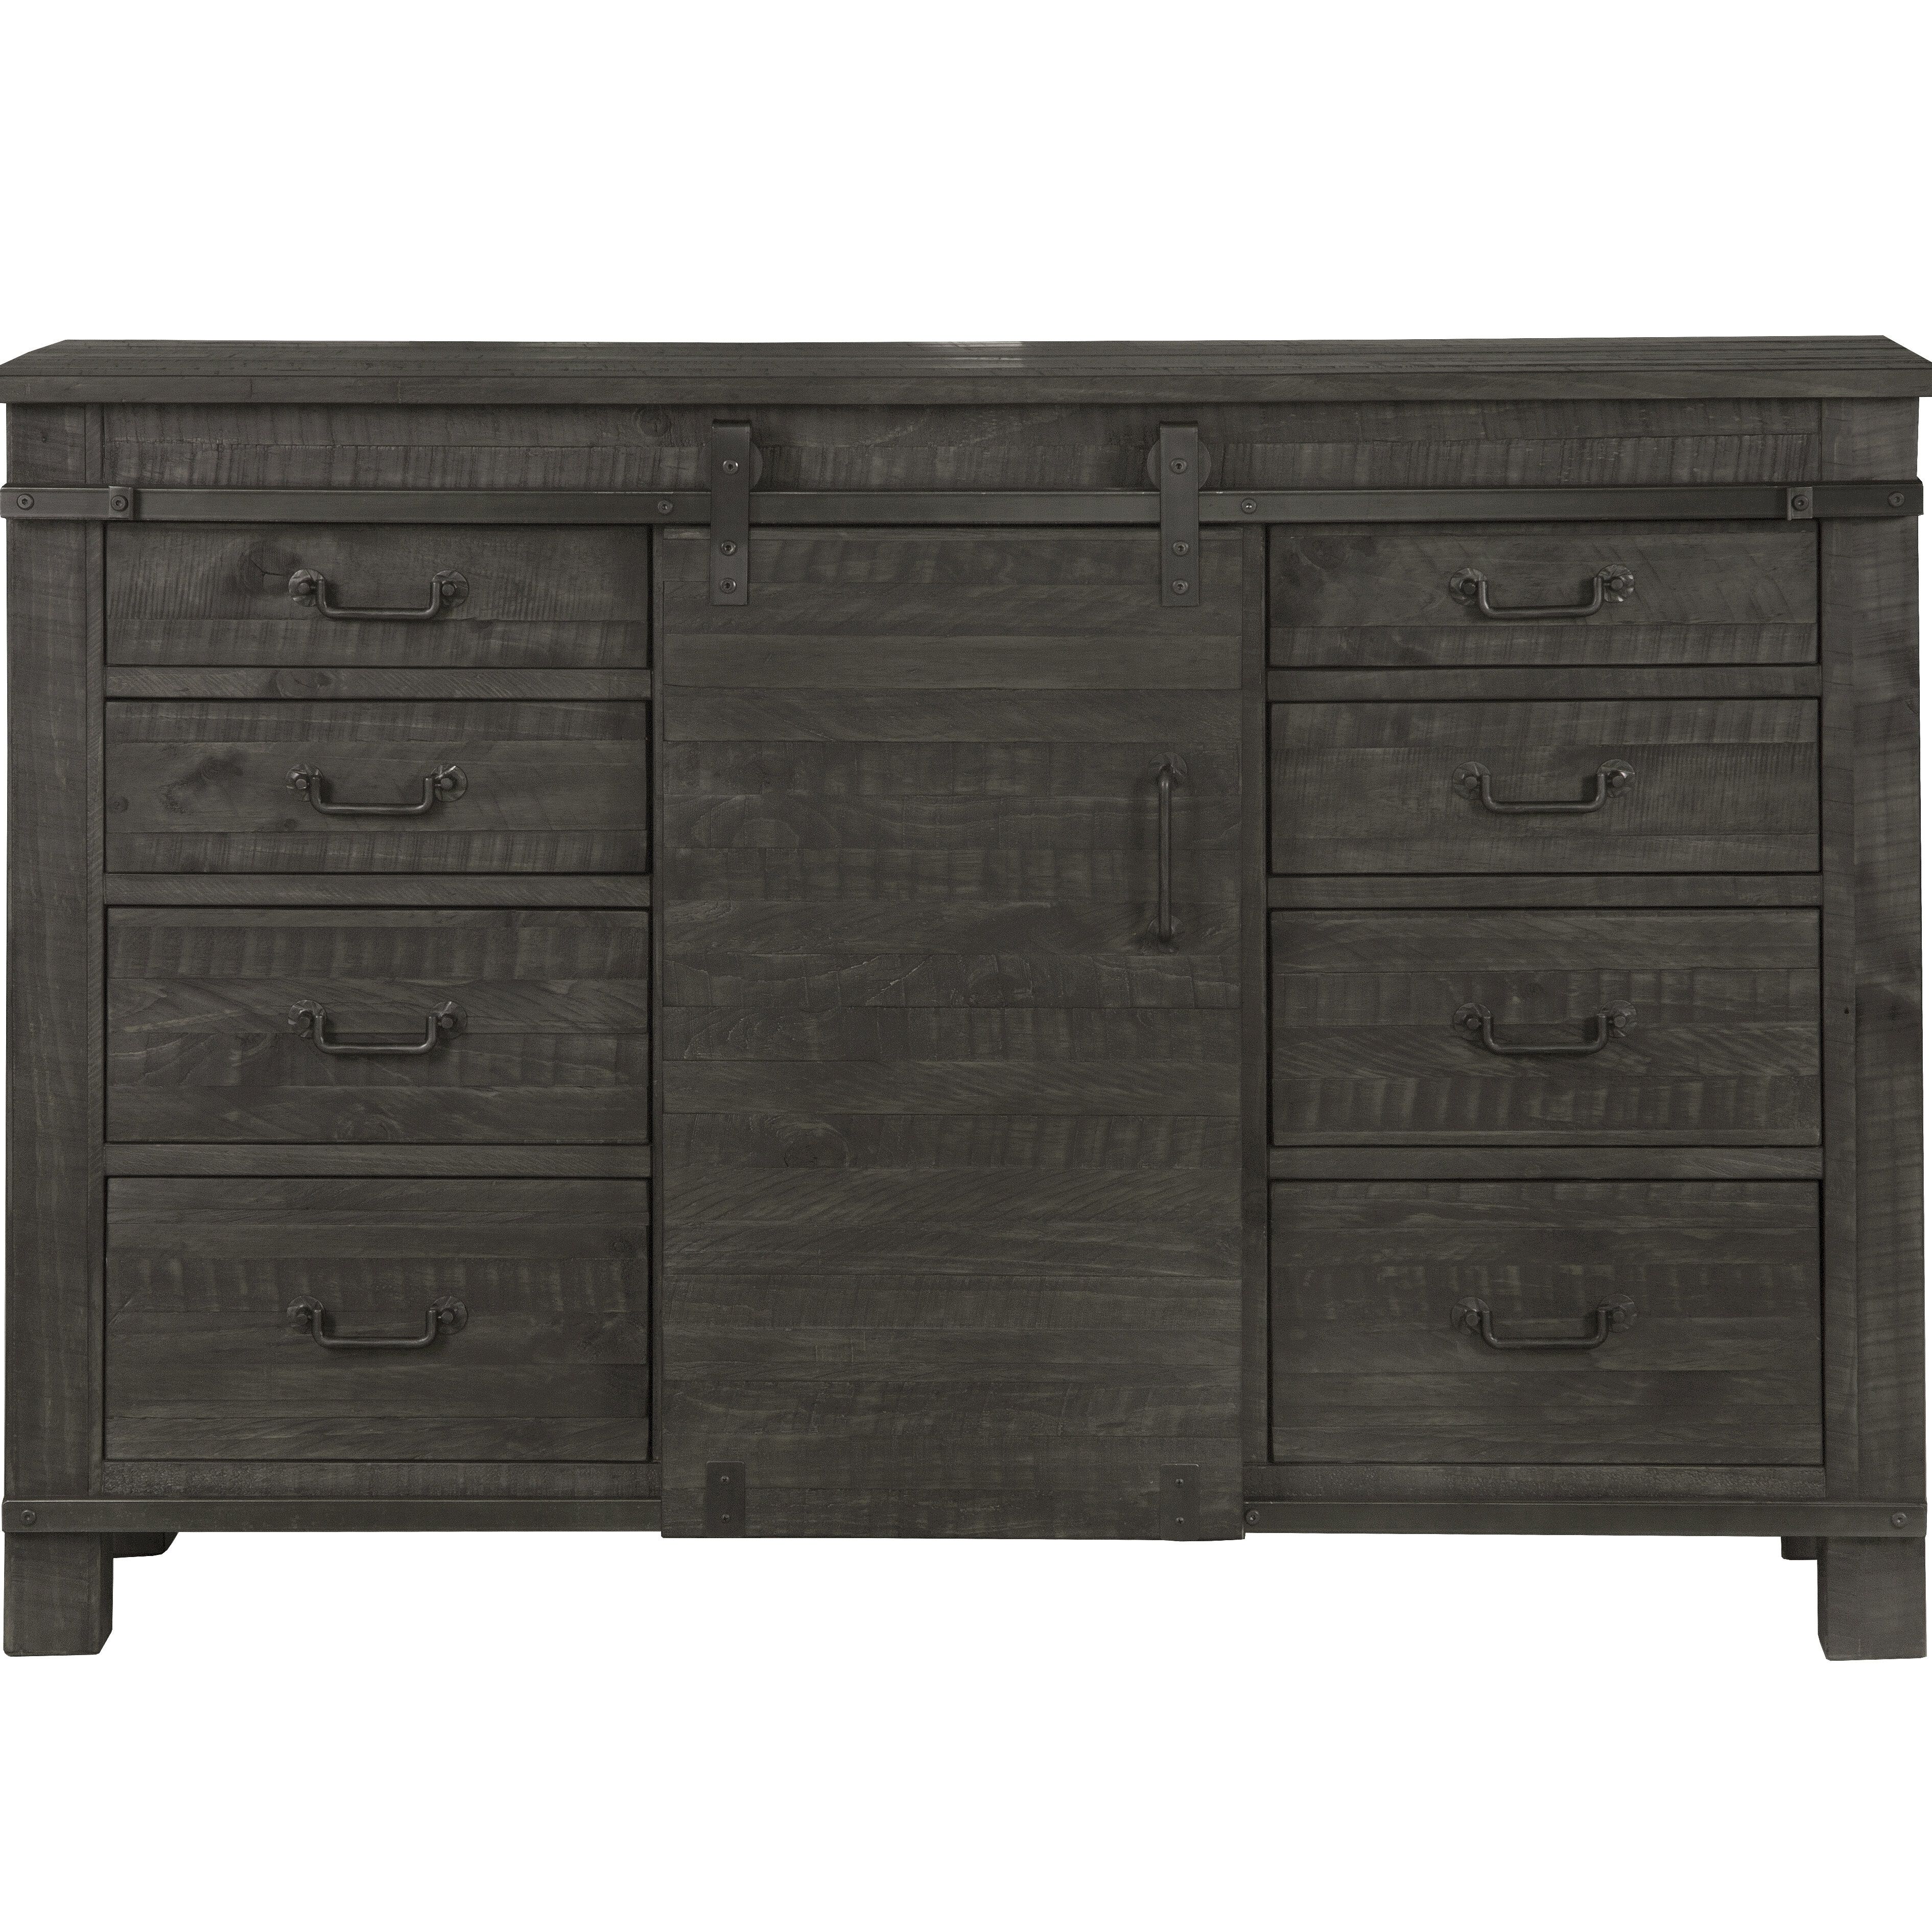 Carston Sideboard & Reviews | Joss & Main Within Langsa Sideboards (View 23 of 30)